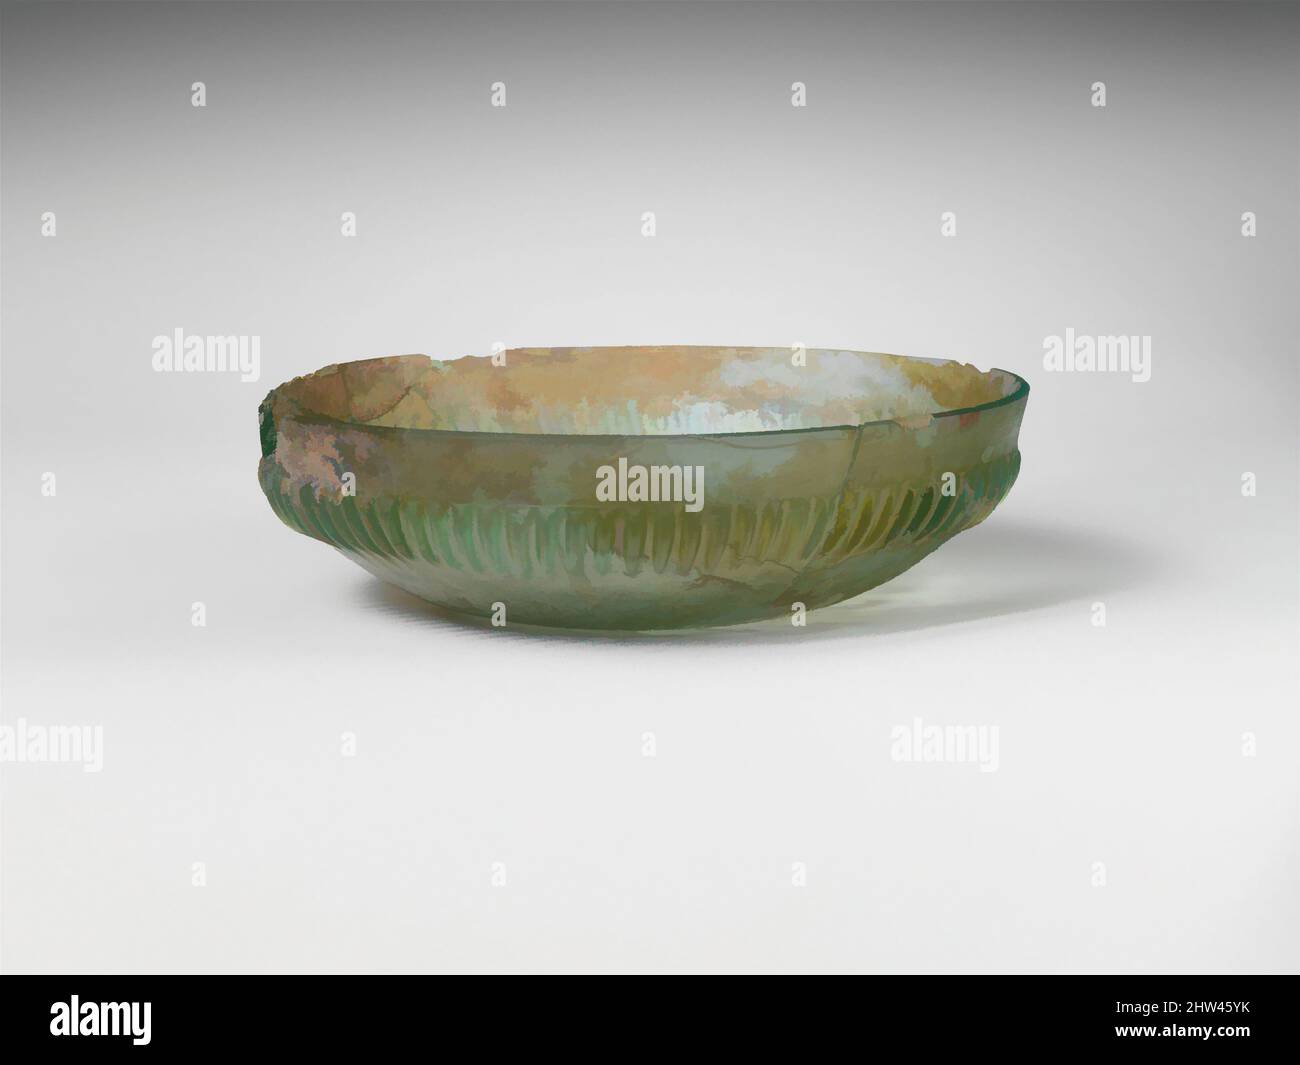 https://c8.alamy.com/comp/2HW45YK/art-inspired-by-ribbed-glass-bowl-early-imperial-late-1st-century-bcmid-1st-century-ad-roman-glass-cast-tooled-and-cut-overall-1-34-in-44-cm-glass-translucent-pale-blue-green-vertical-rim-with-beveled-top-edge-plain-band-around-top-of-sides-tapering-downwards-classic-works-modernized-by-artotop-with-a-splash-of-modernity-shapes-color-and-value-eye-catching-visual-impact-on-art-emotions-through-freedom-of-artworks-in-a-contemporary-way-a-timeless-message-pursuing-a-wildly-creative-new-direction-artists-turning-to-the-digital-medium-and-creating-the-artotop-nft-2HW45YK.jpg